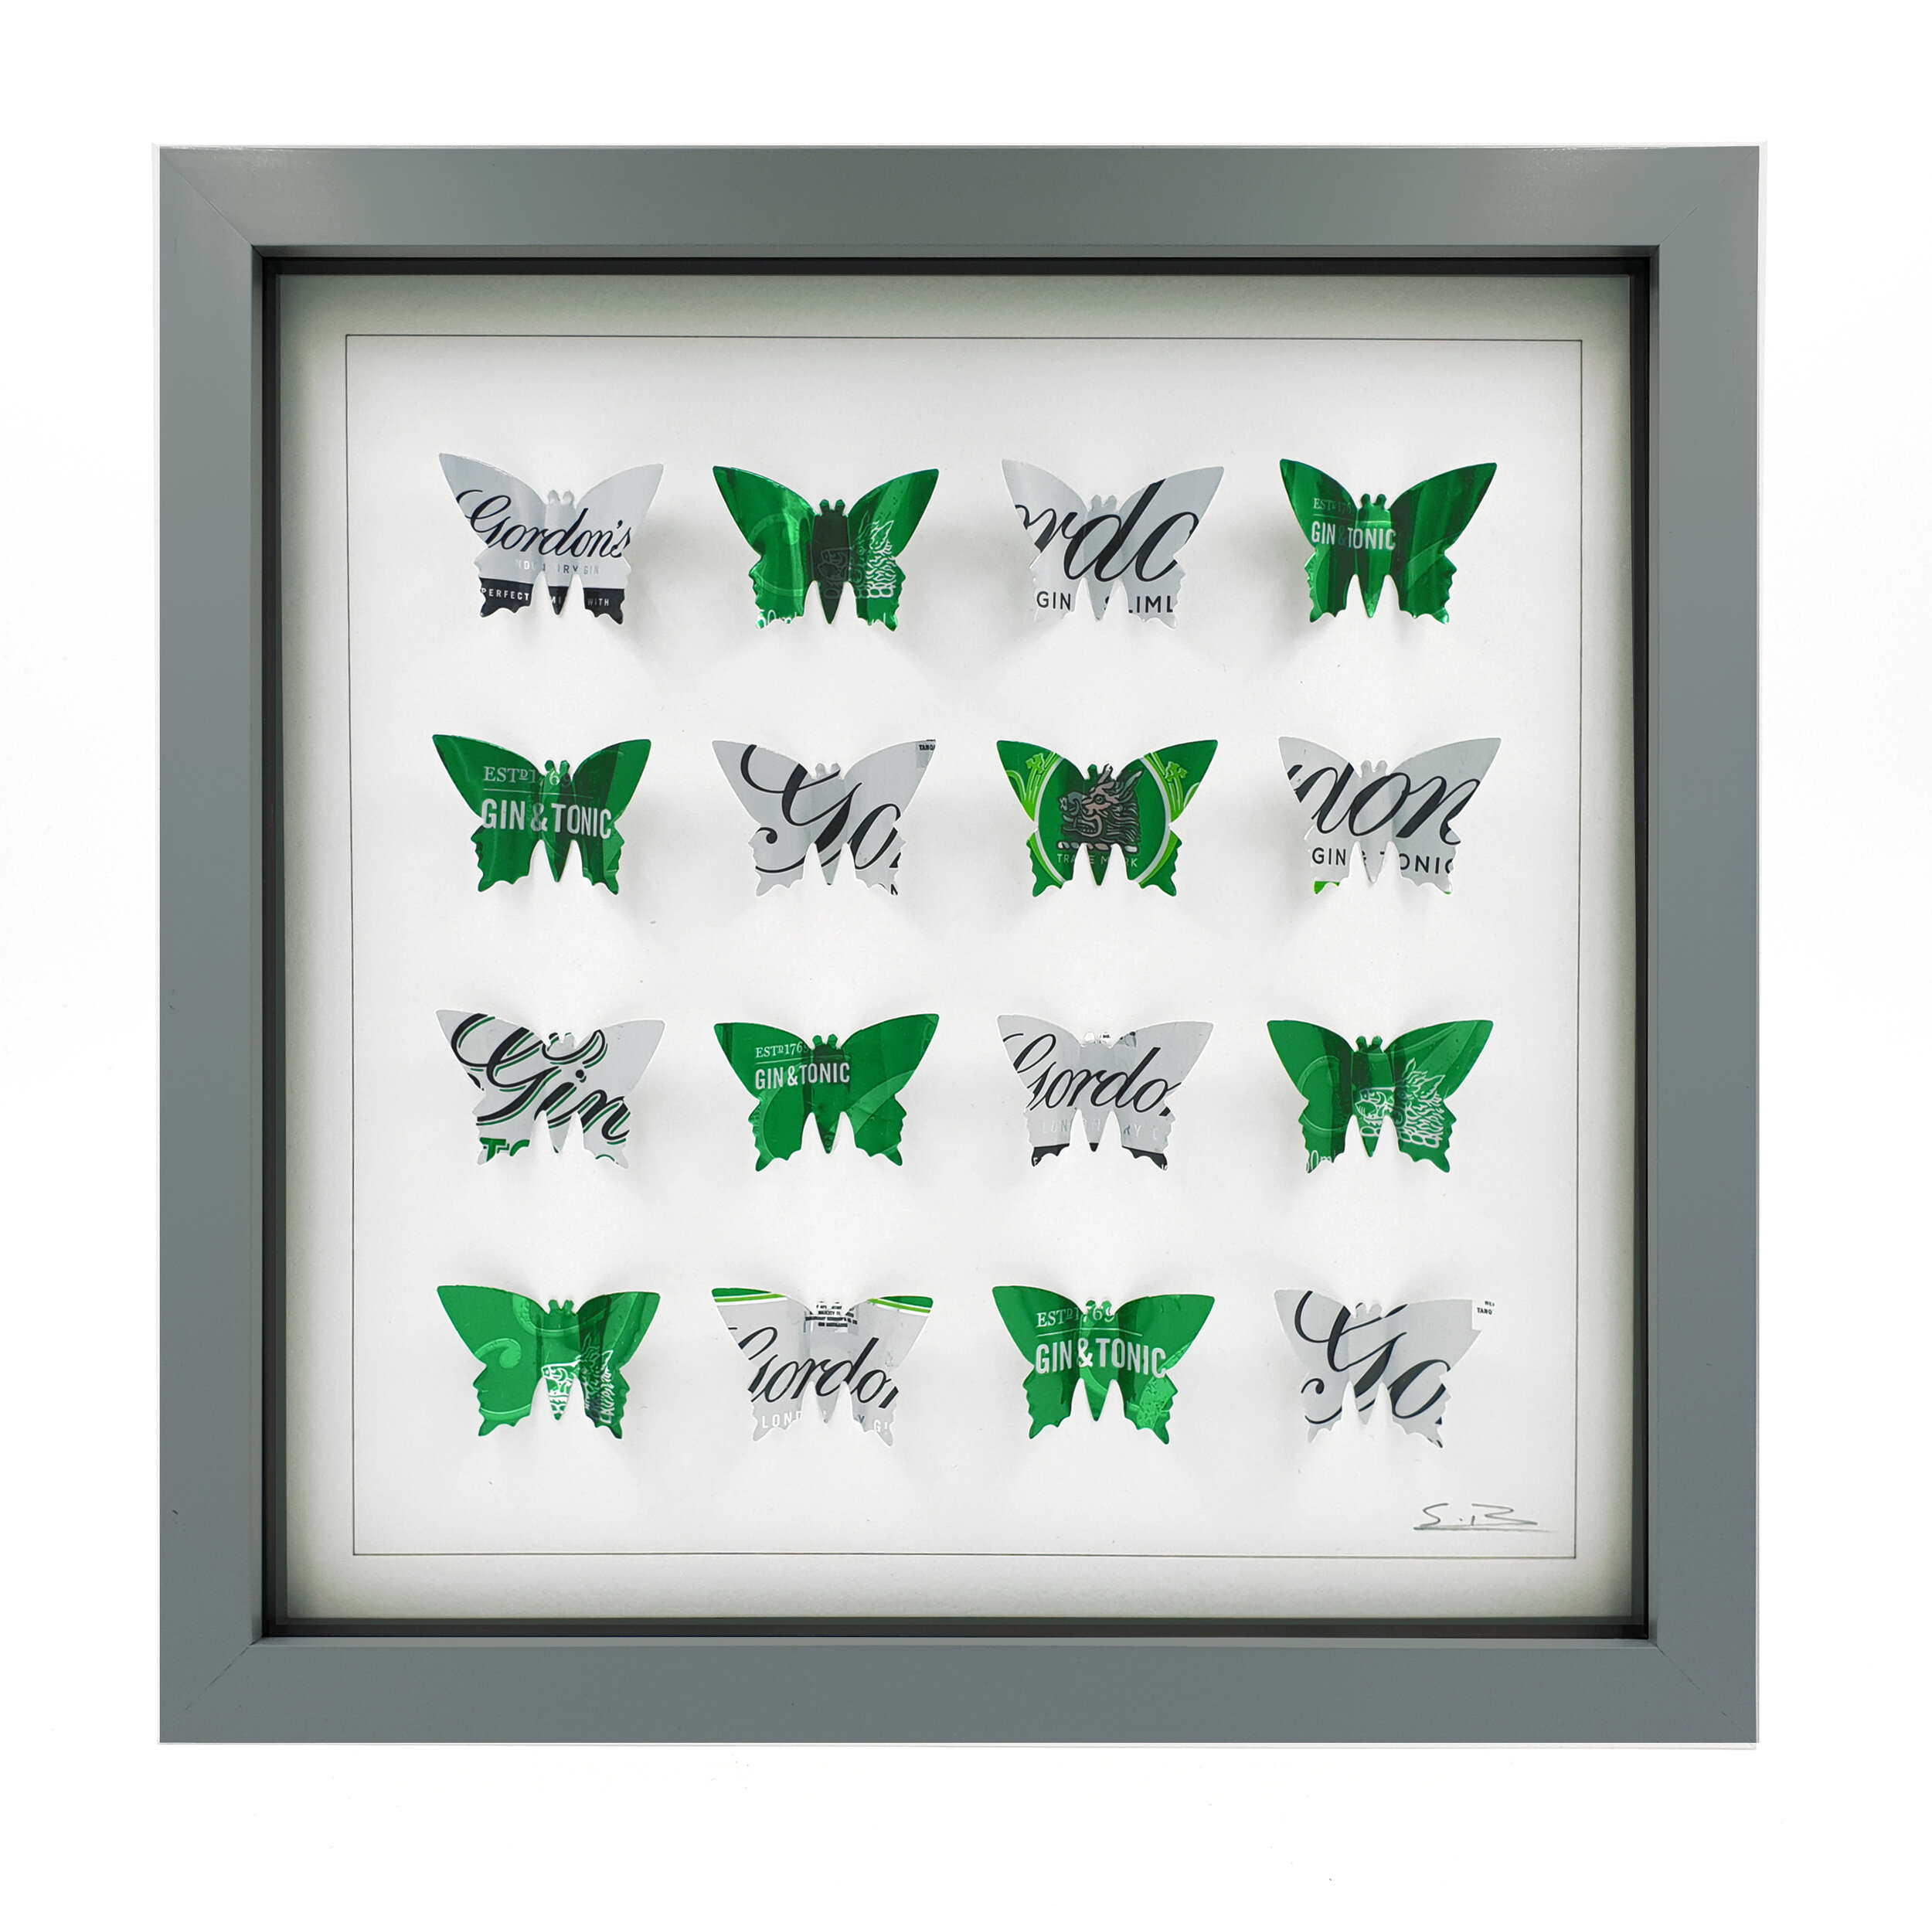  Gin and Tonic green and white 4x4 butterfly pattern grey frame 